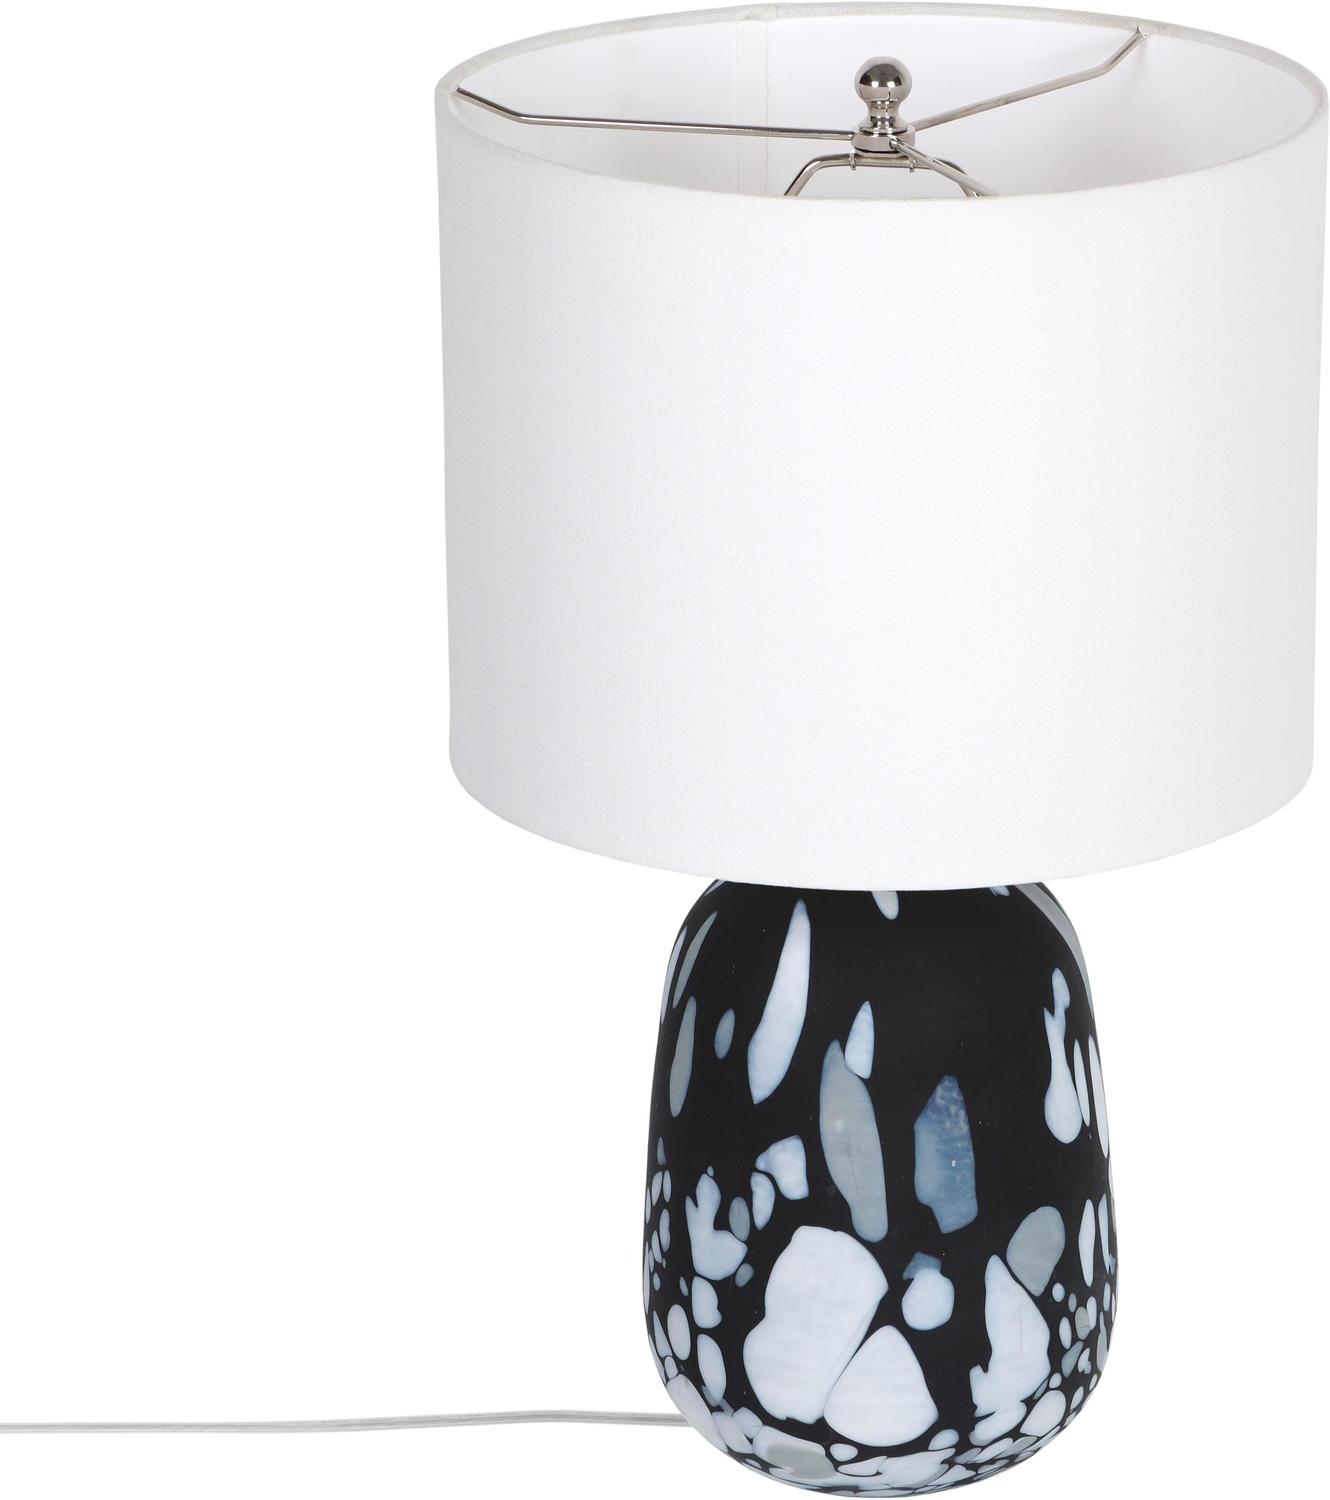 brass glass coffee table Tov Furniture Table Lamps Black and White,Cream